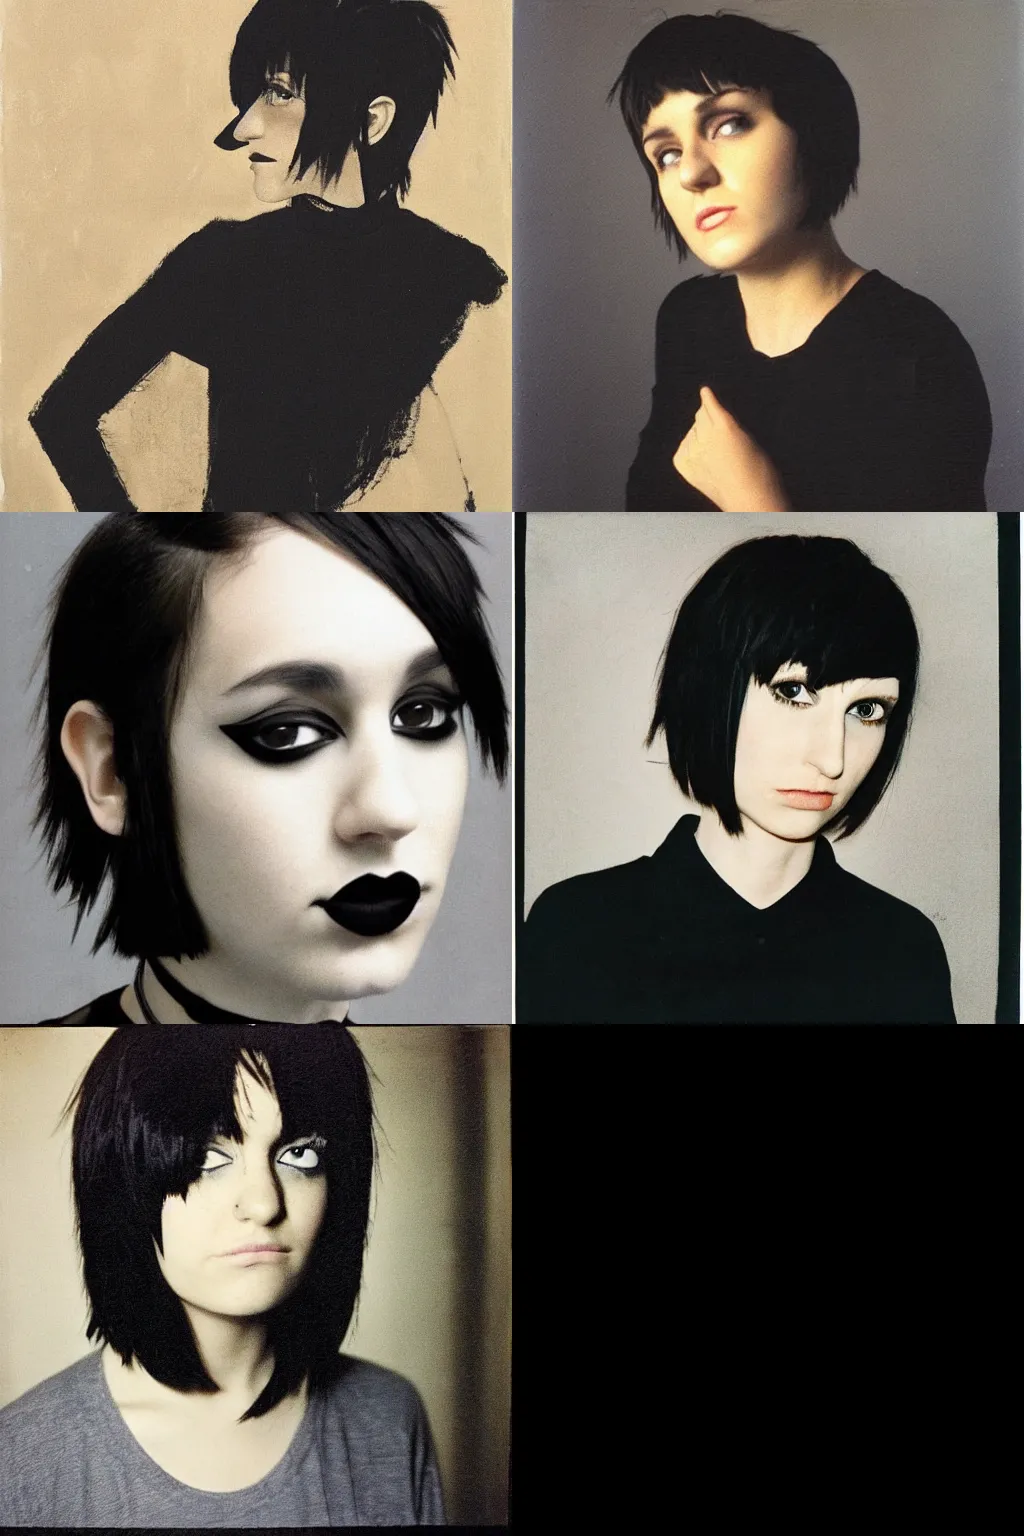 Prompt: an emo portrait by josef albers. her hair is dark brown and cut into a short, messy pixie cut. she has a slightly rounded face, with a pointed chin, large entirely - black eyes, and a small nose. she is wearing a black tank top, a black leather jacket, a black knee - length skirt, and a black choker..